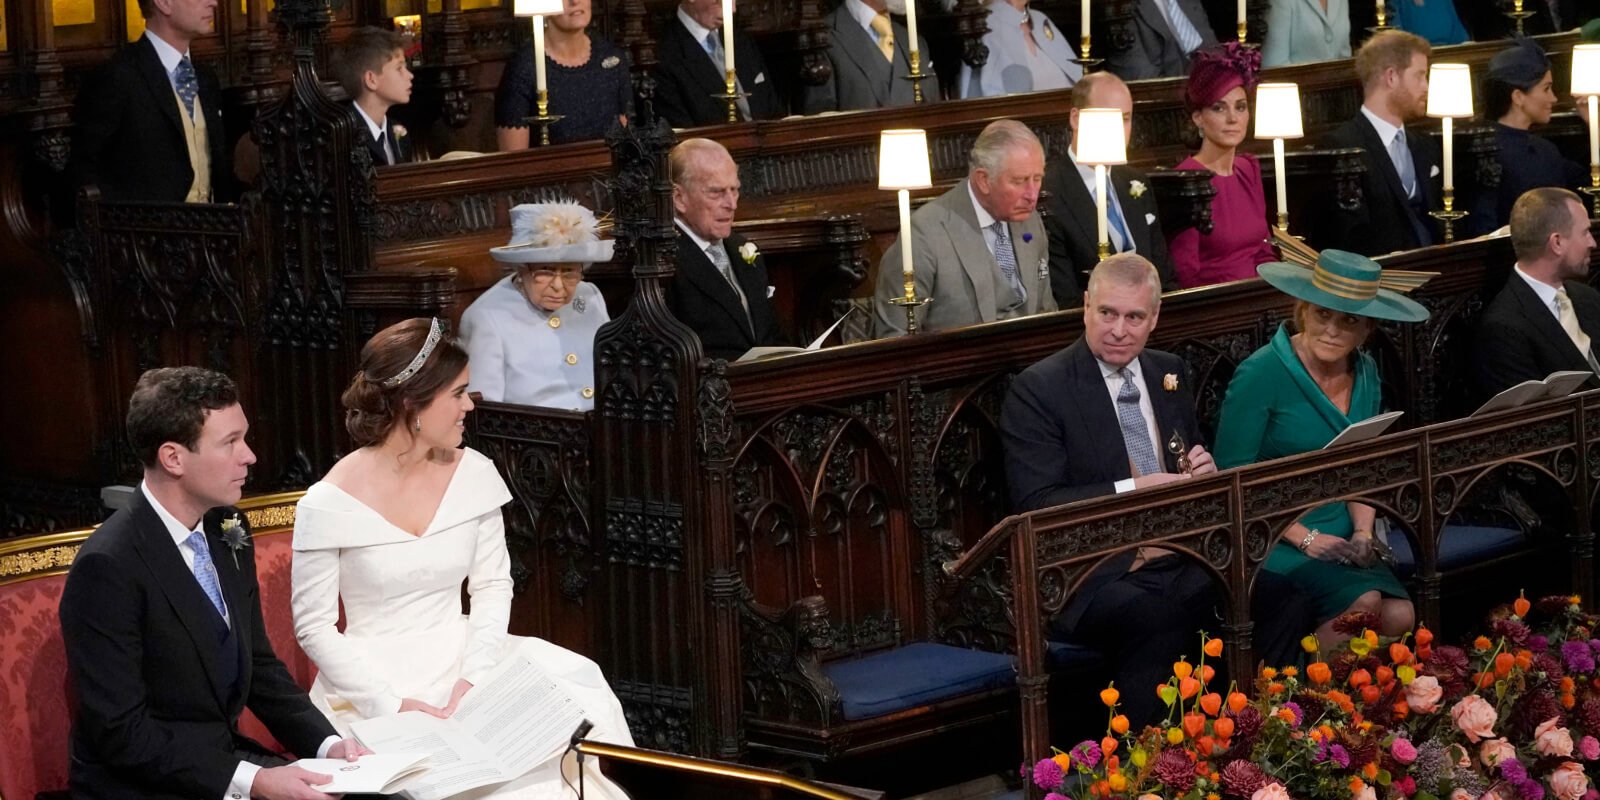 Sarah Ferguson sat alongside Prince Andrew and members of the royal family, including Prince Harry and Meghan Markle, at the wedding of her daughter Princess Eugenie to Jack Brooksbank.